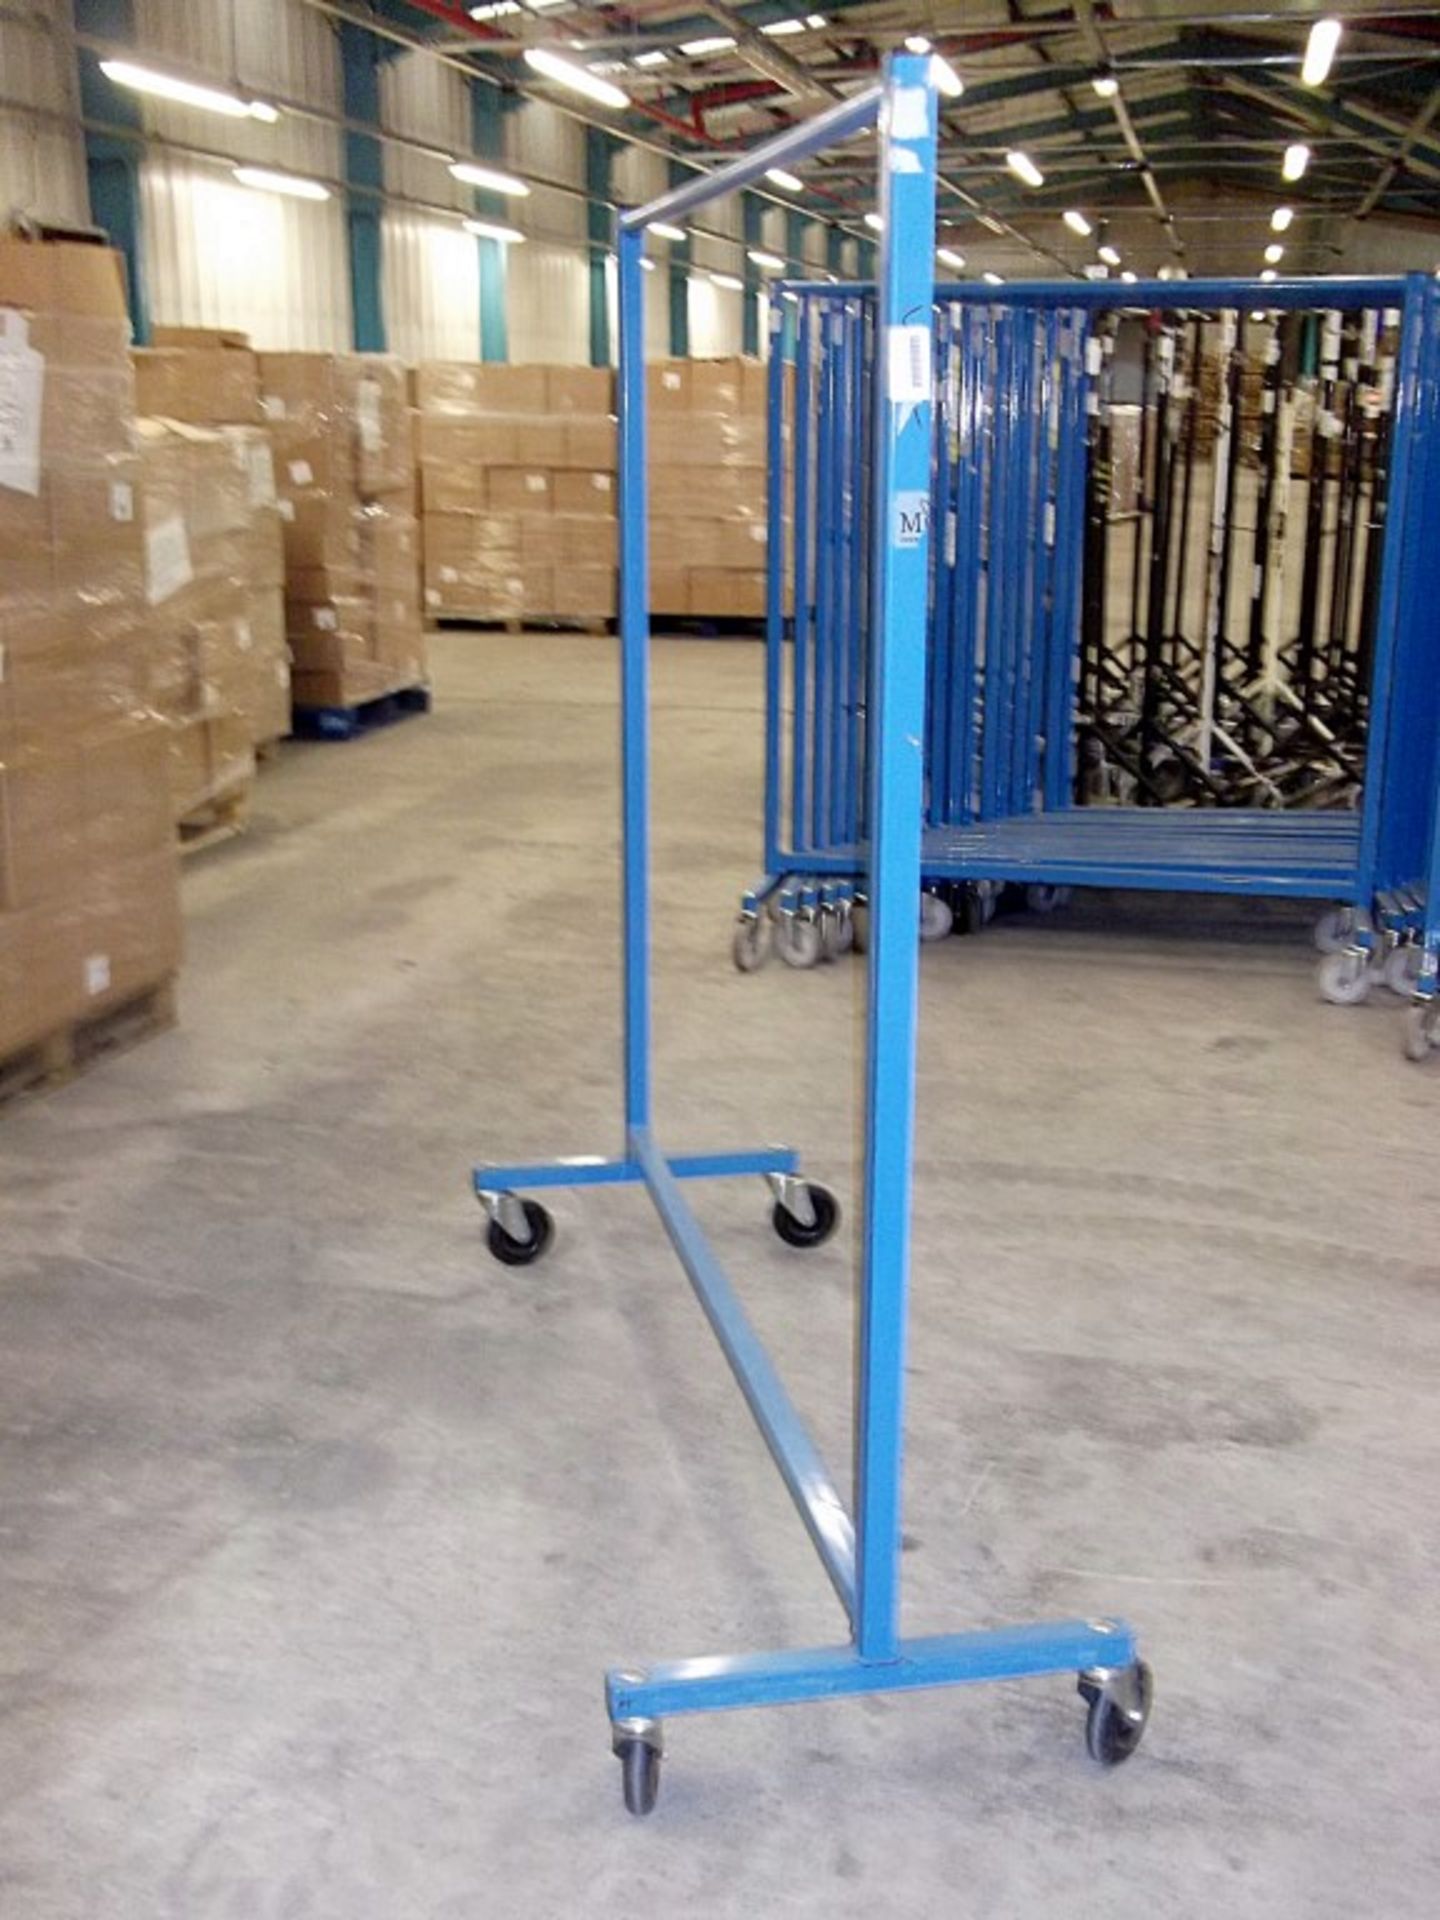 1 x Single Tier Heavy Duty Clothing Rail In BLUE – Brand: Steely Rails  – Pre-owned, In Good Working - Image 3 of 4